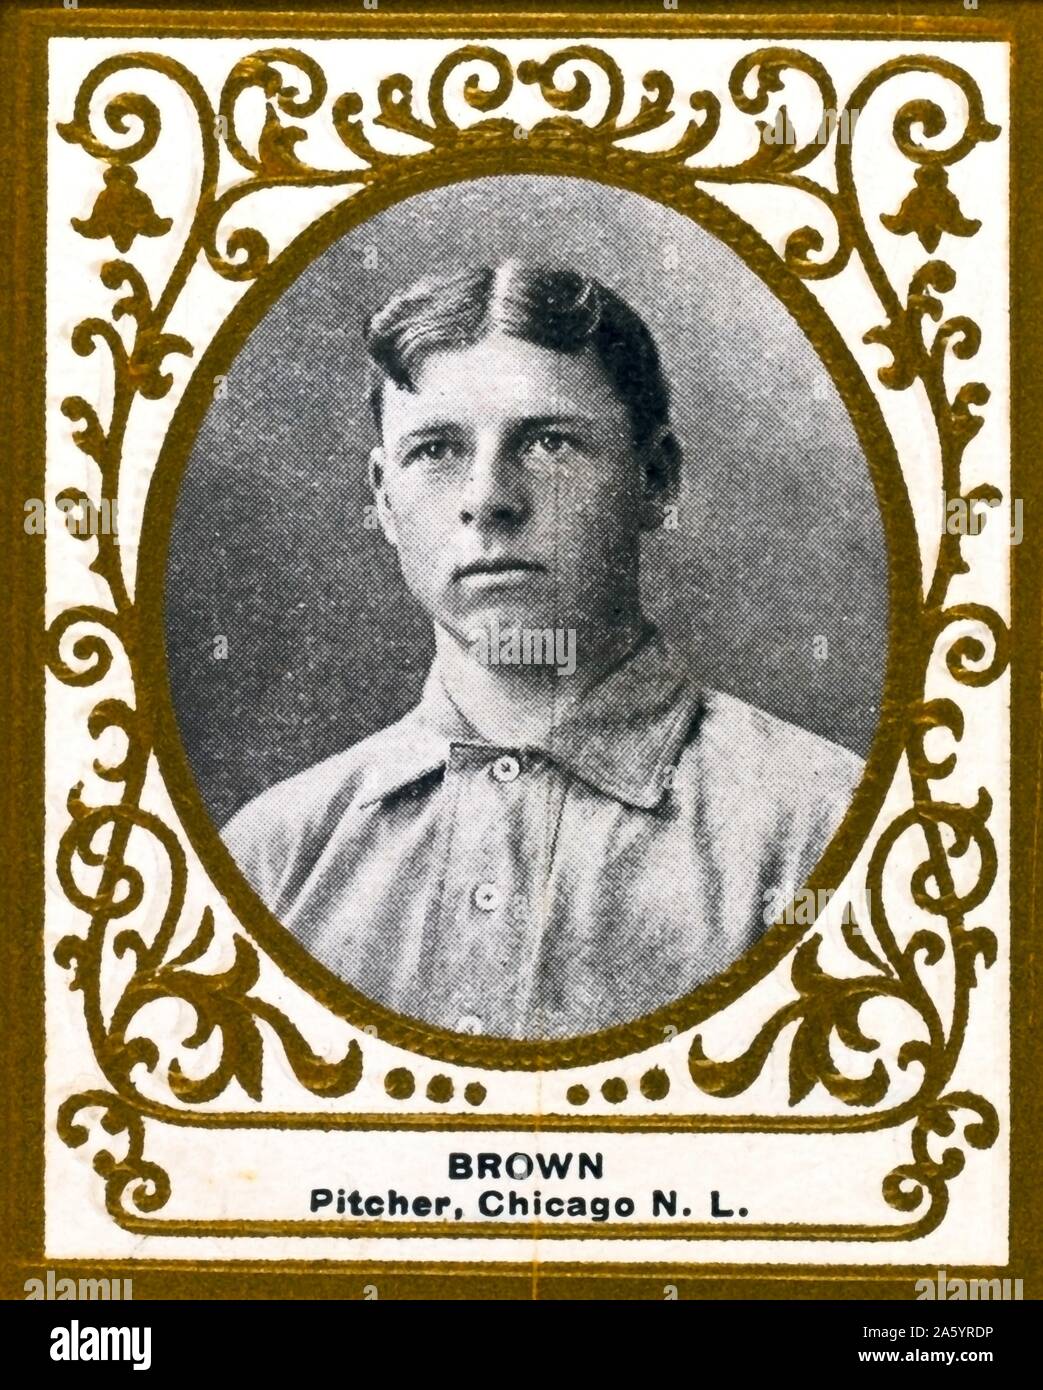 Three Finger Brown, Chicago Cubs, baseball card portrait Stock Photo